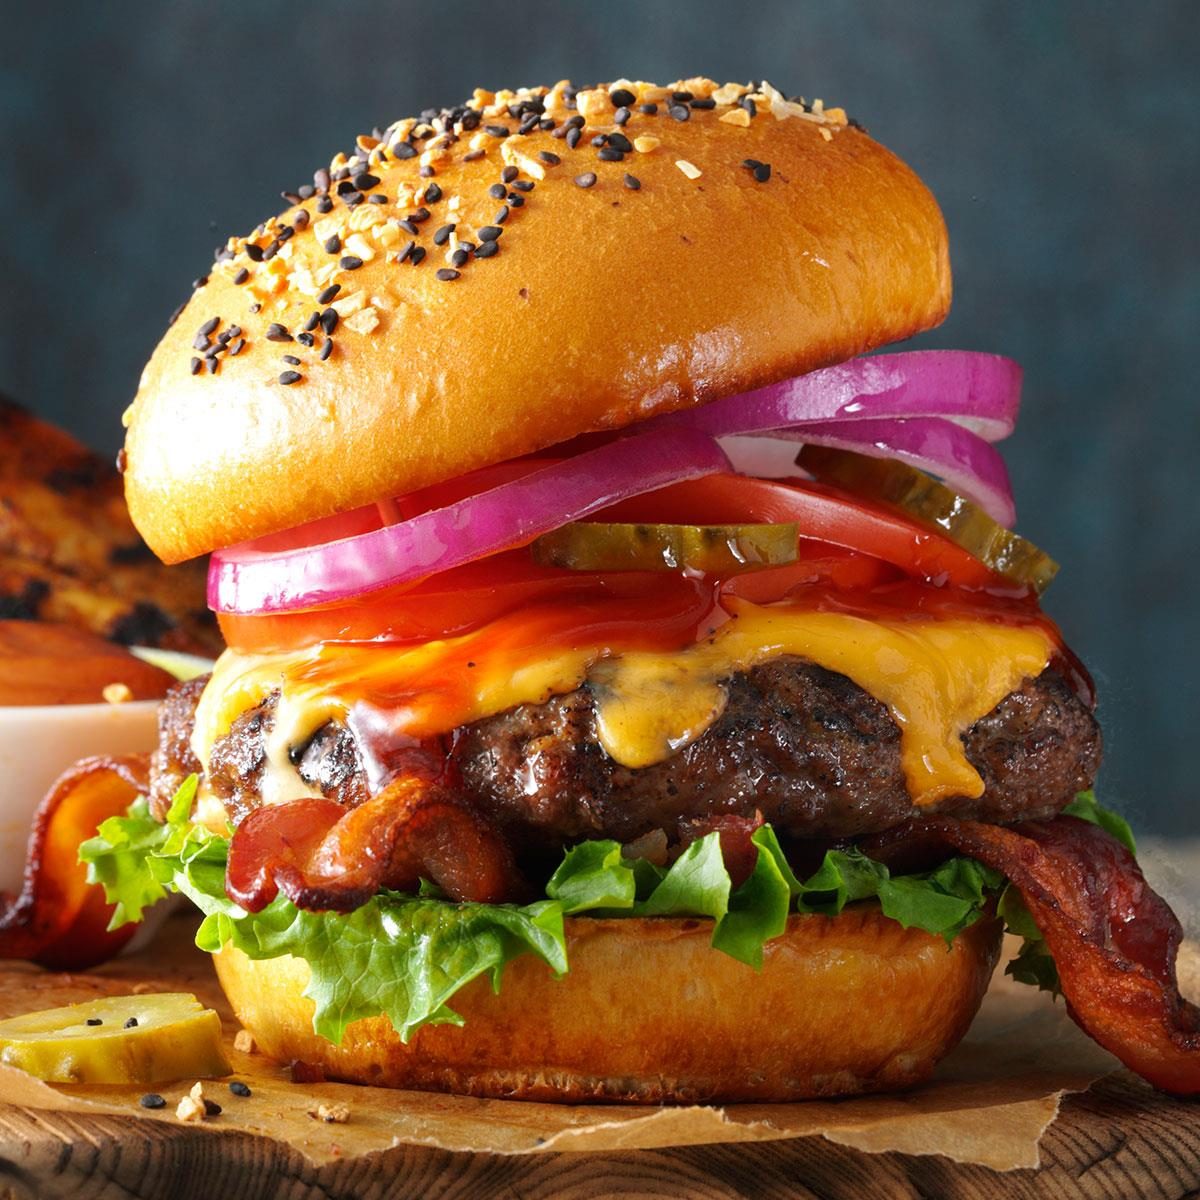 Barbecued Burgers Recipe: How to Make It | Taste of Home